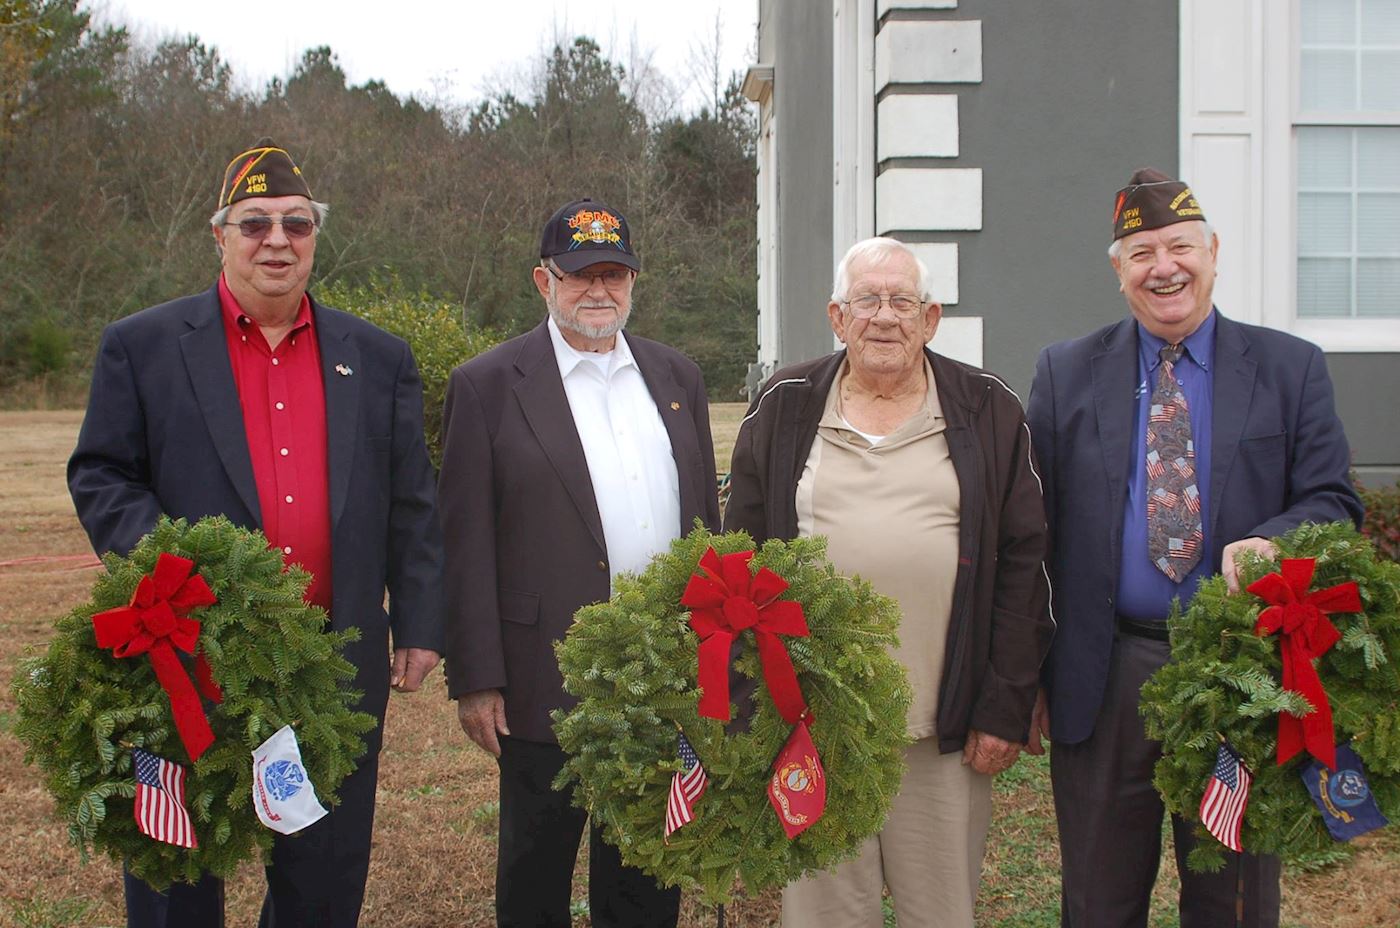 We lost our Post Commander (far left) in June, a Vietnam Veteran. This year he will be honored & remembered with a veterans wreath.  We love you Commander 'Mac'.
